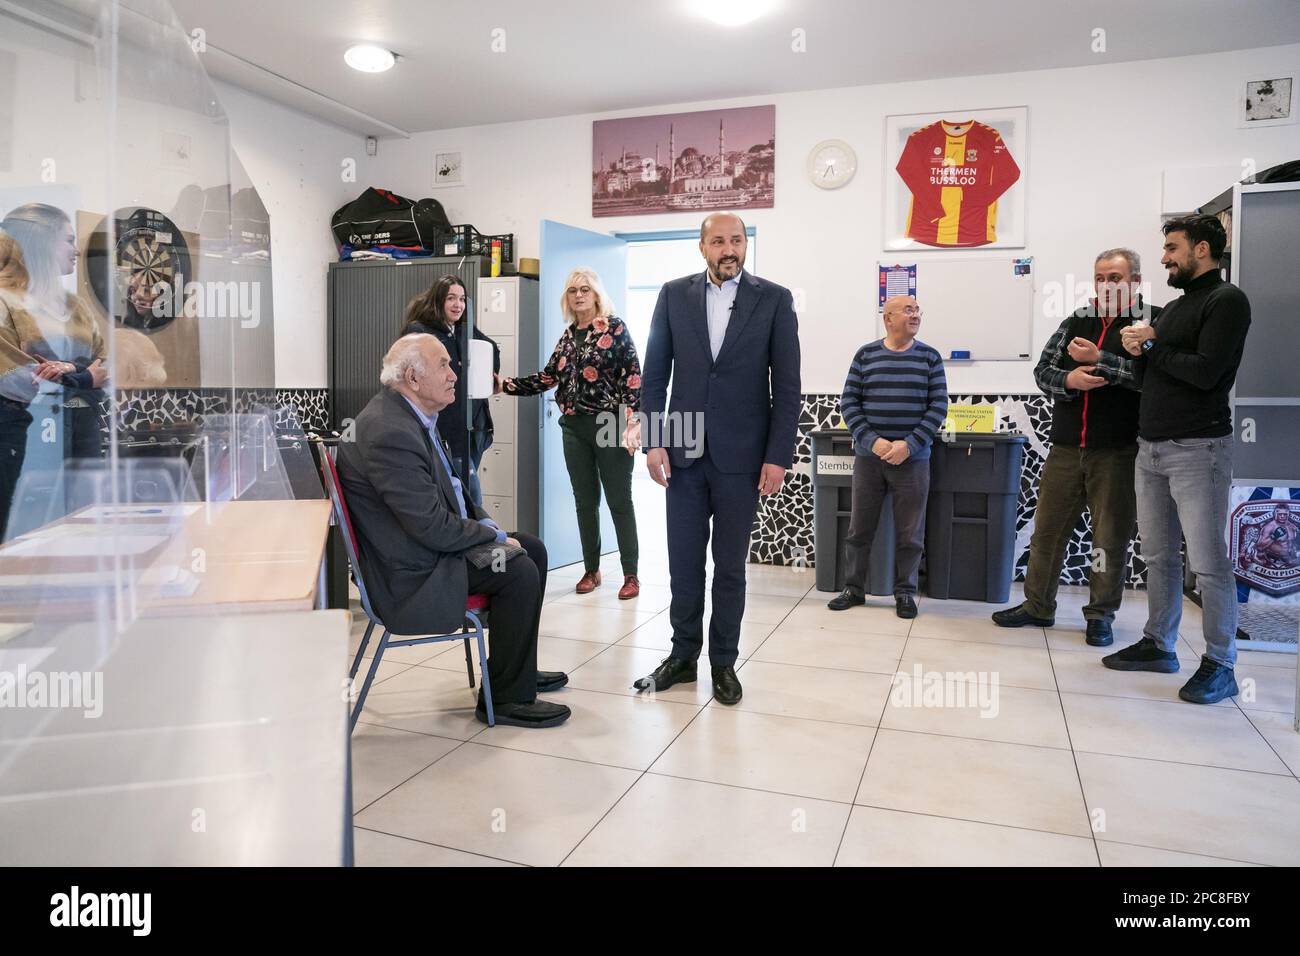 ARNHEM - Mayor Ahmed Marcouch during the trial voting in mosque Turkyem, in the run-up to the Provincial Council elections. ANP JEROEN JUMELET netherlands out - belgium out Stock Photo